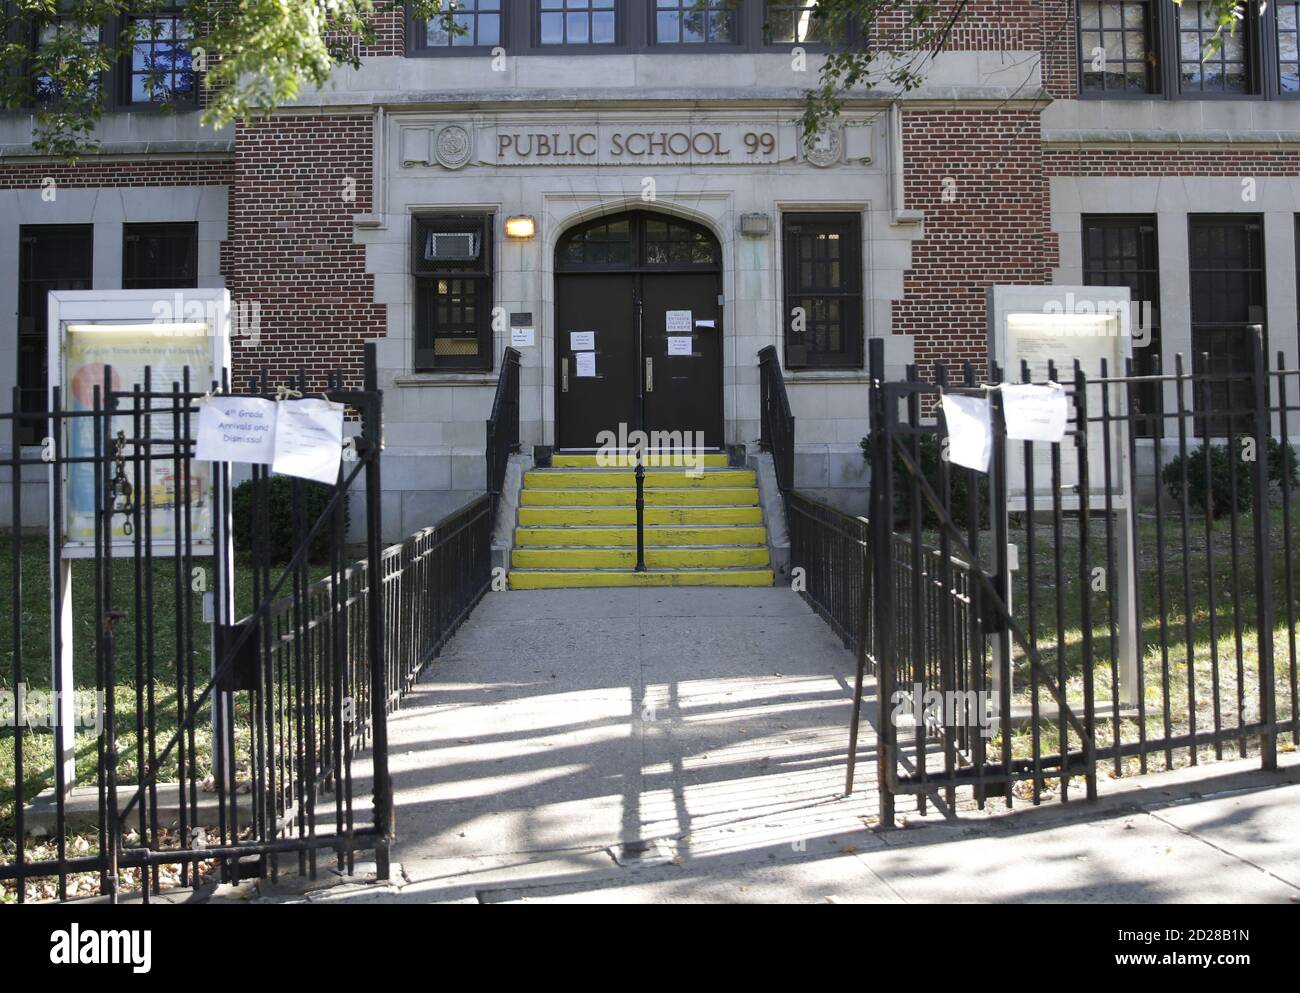 https://c8.alamy.com/comp/2D28B1N/queens-united-states-06th-oct-2020-an-entrance-to-ps-99-queens-the-kew-gardens-school-is-empty-of-teachers-and-students-in-the-kew-gardens-section-of-new-york-city-on-tuesday-october-6-2020-a-few-days-after-the-last-of-new-york-citys-public-schools-opened-for-in-person-learning-more-than-100-of-them-are-closed-again-because-theyre-located-in-neighborhoods-with-spiking-covid-19-infection-rates-photo-by-john-angelilloupi-credit-upialamy-live-news-2D28B1N.jpg